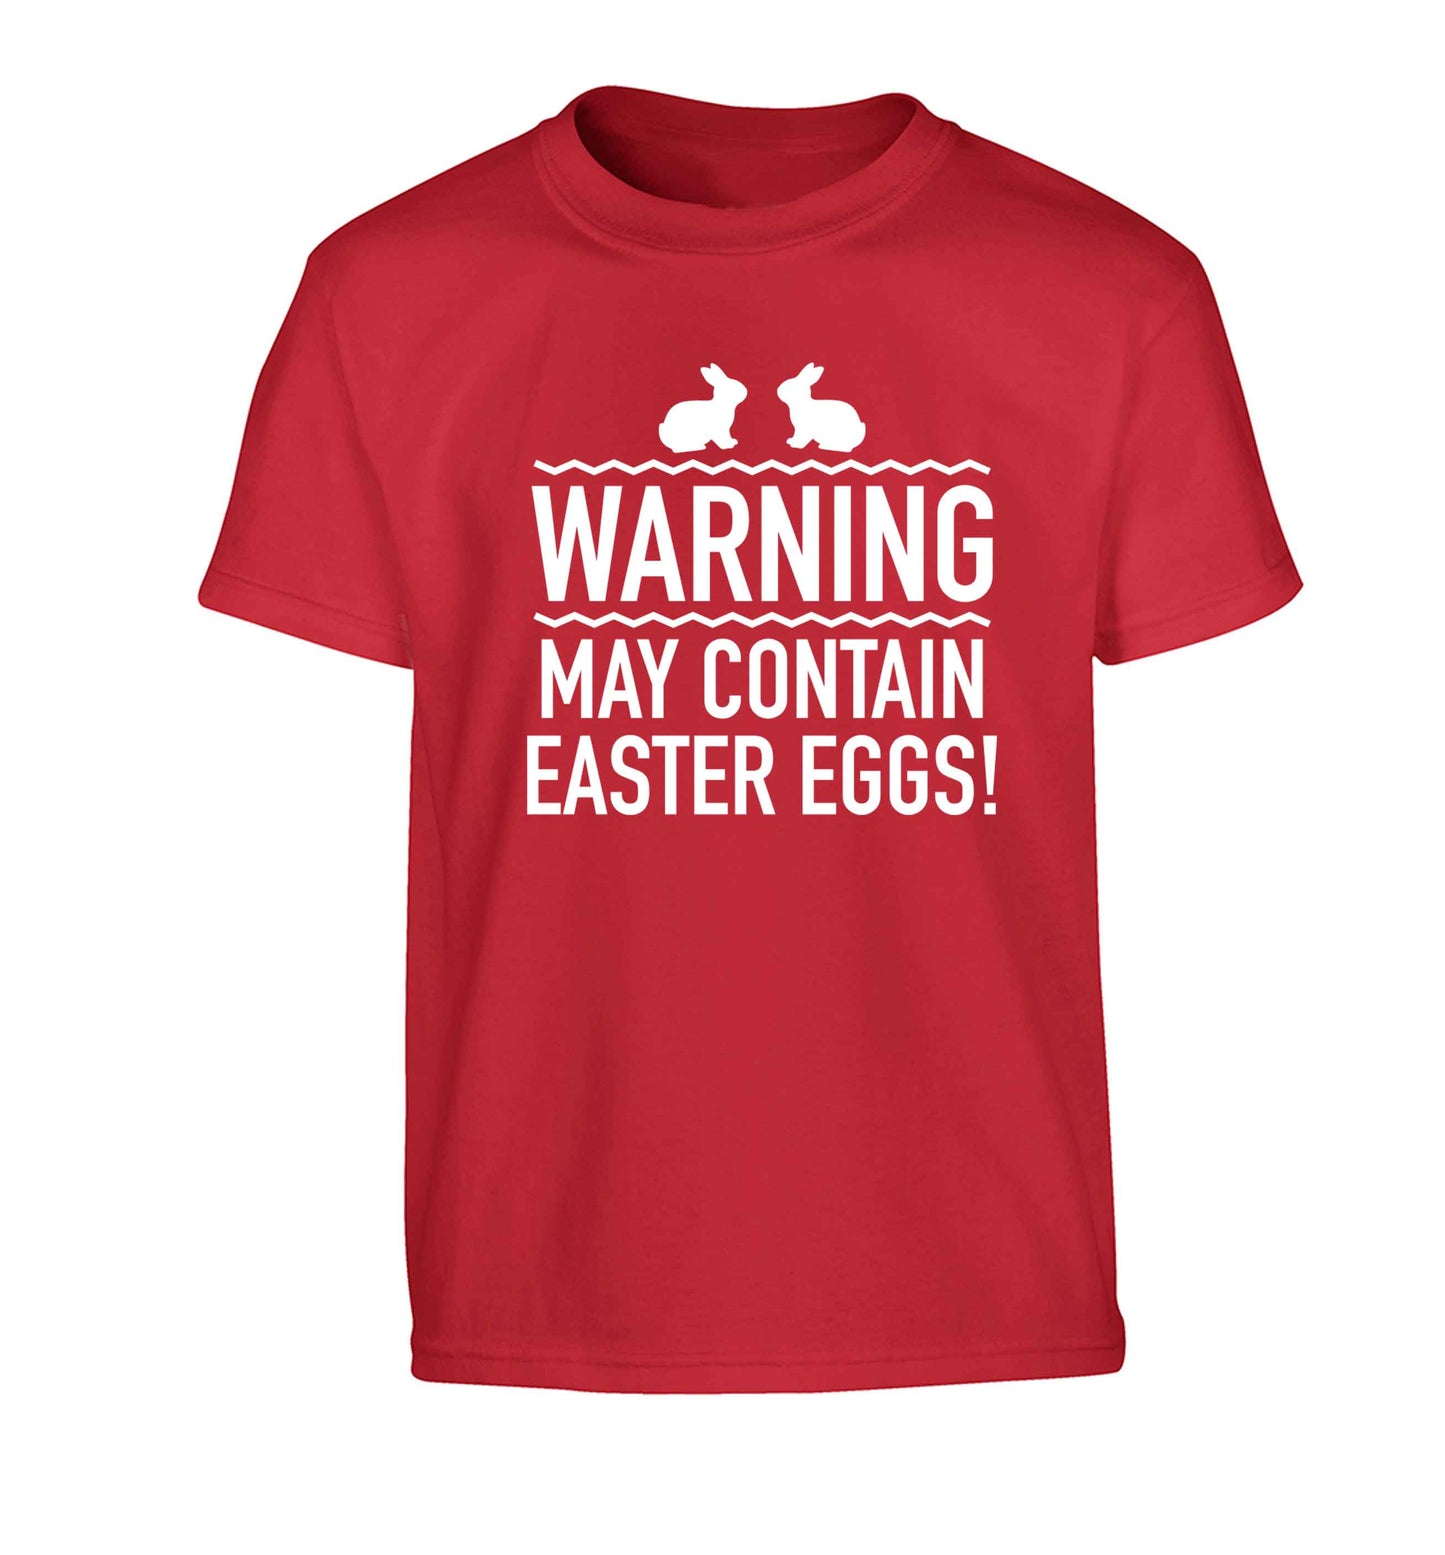 Warning may contain Easter eggs Children's red Tshirt 12-13 Years